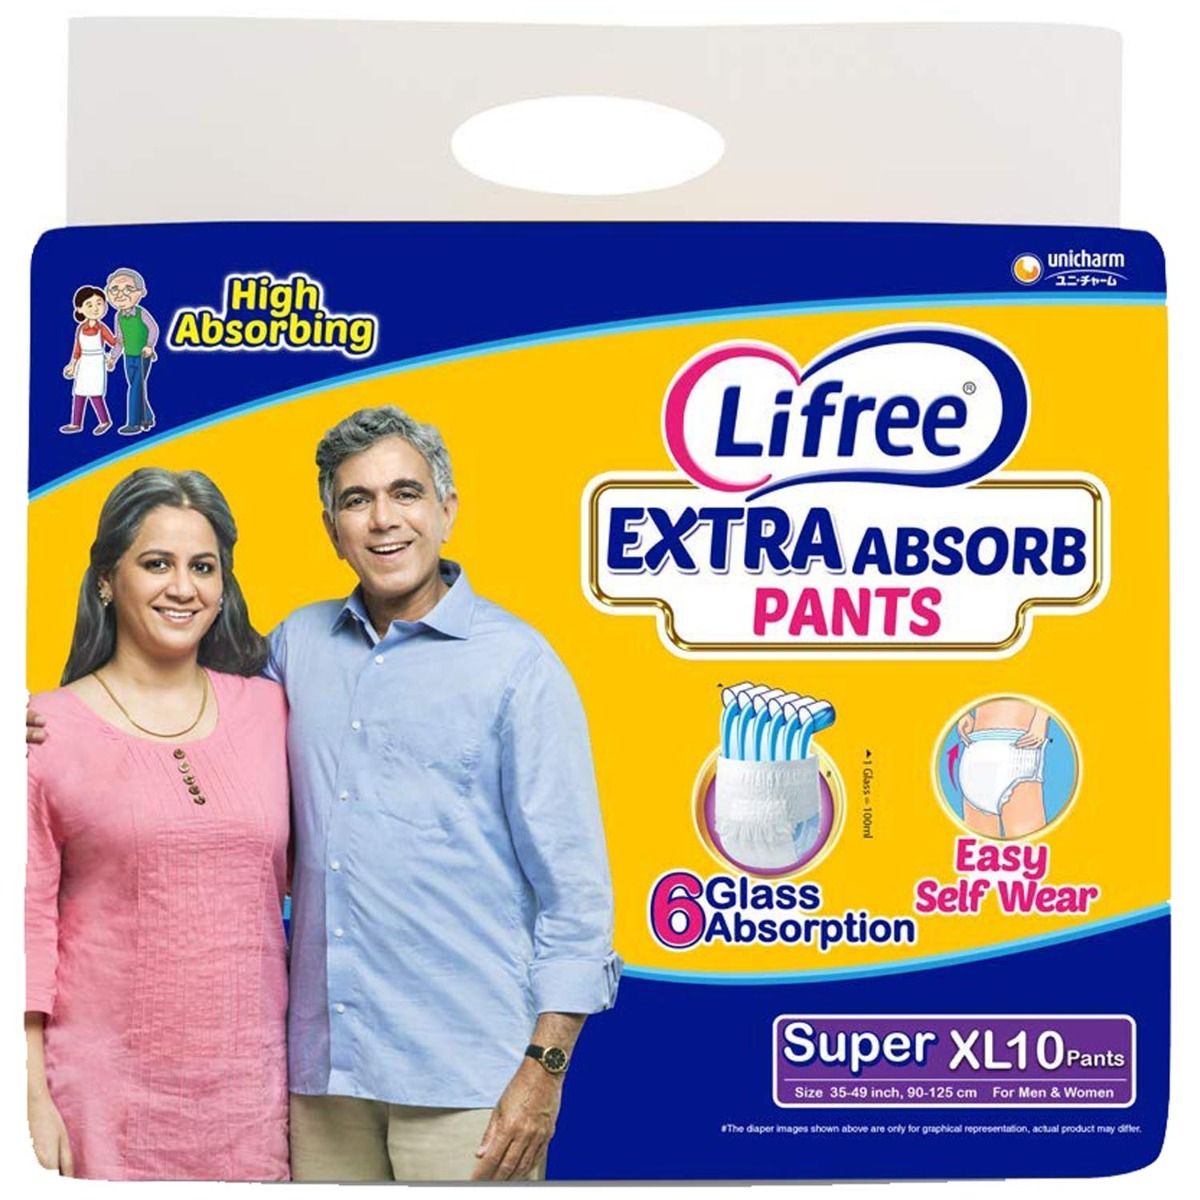 Lifree Extra Absorbent Adult Diaper Pants XL, 10 Count, Pack of 1 